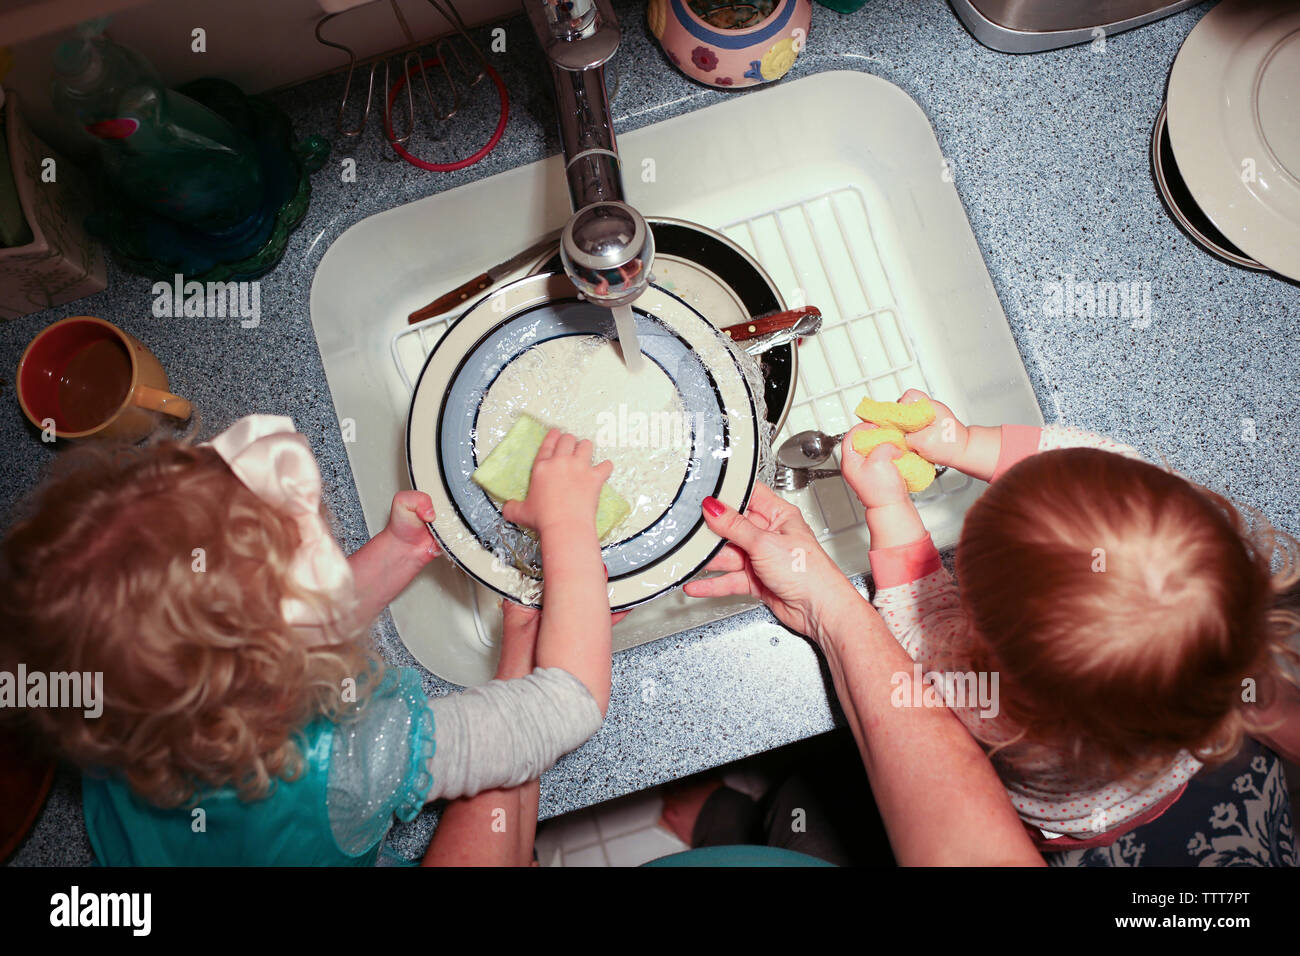 Cropped hands of grandmother with grandchildren washing plates in kitchen Stock Photo